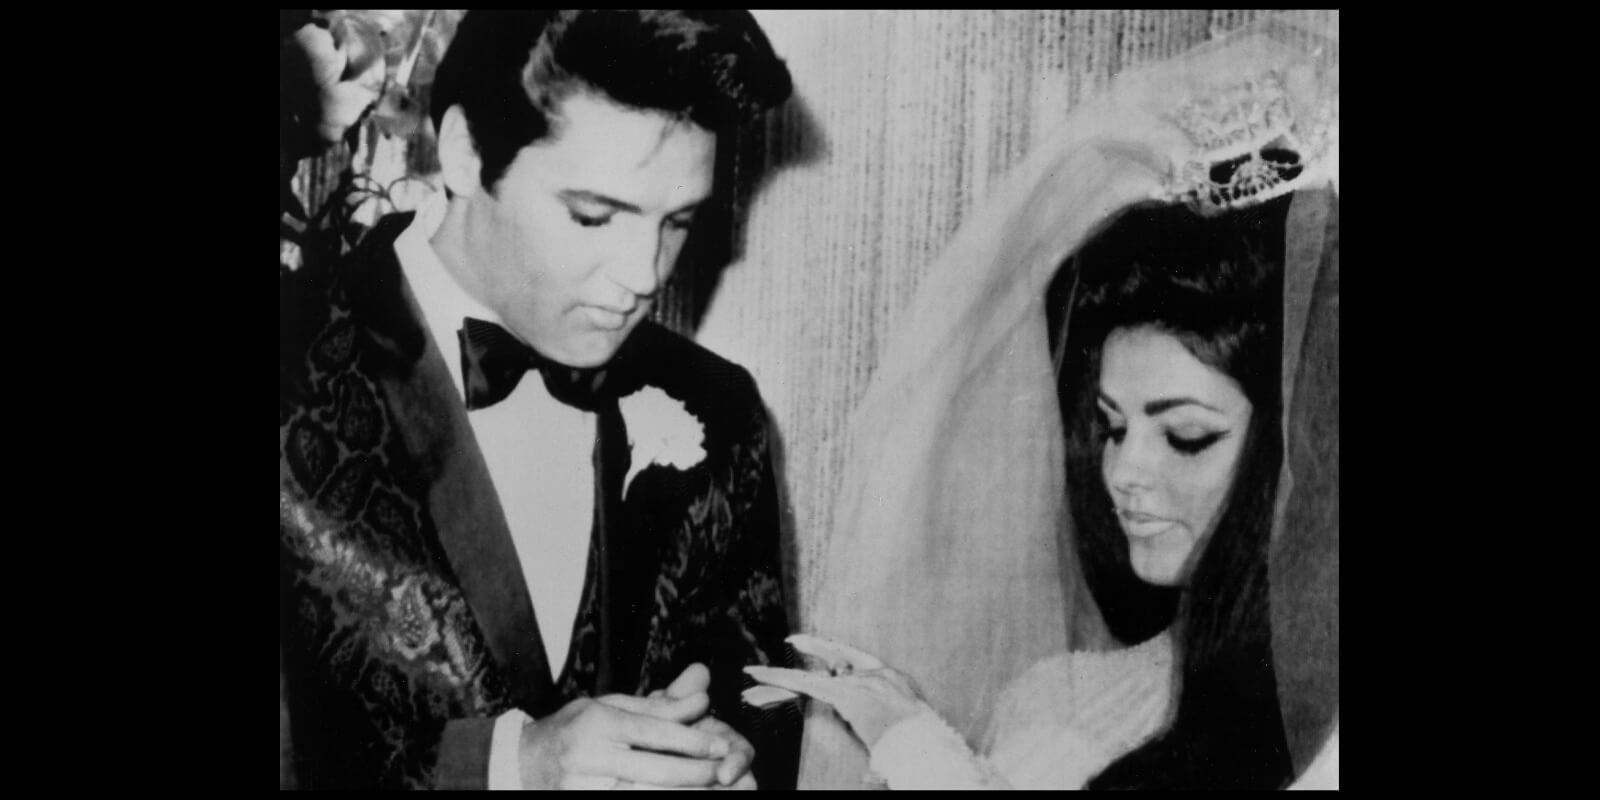 Elvis and Priscilla Presley photographed on their wedding day, May 1, 1967.